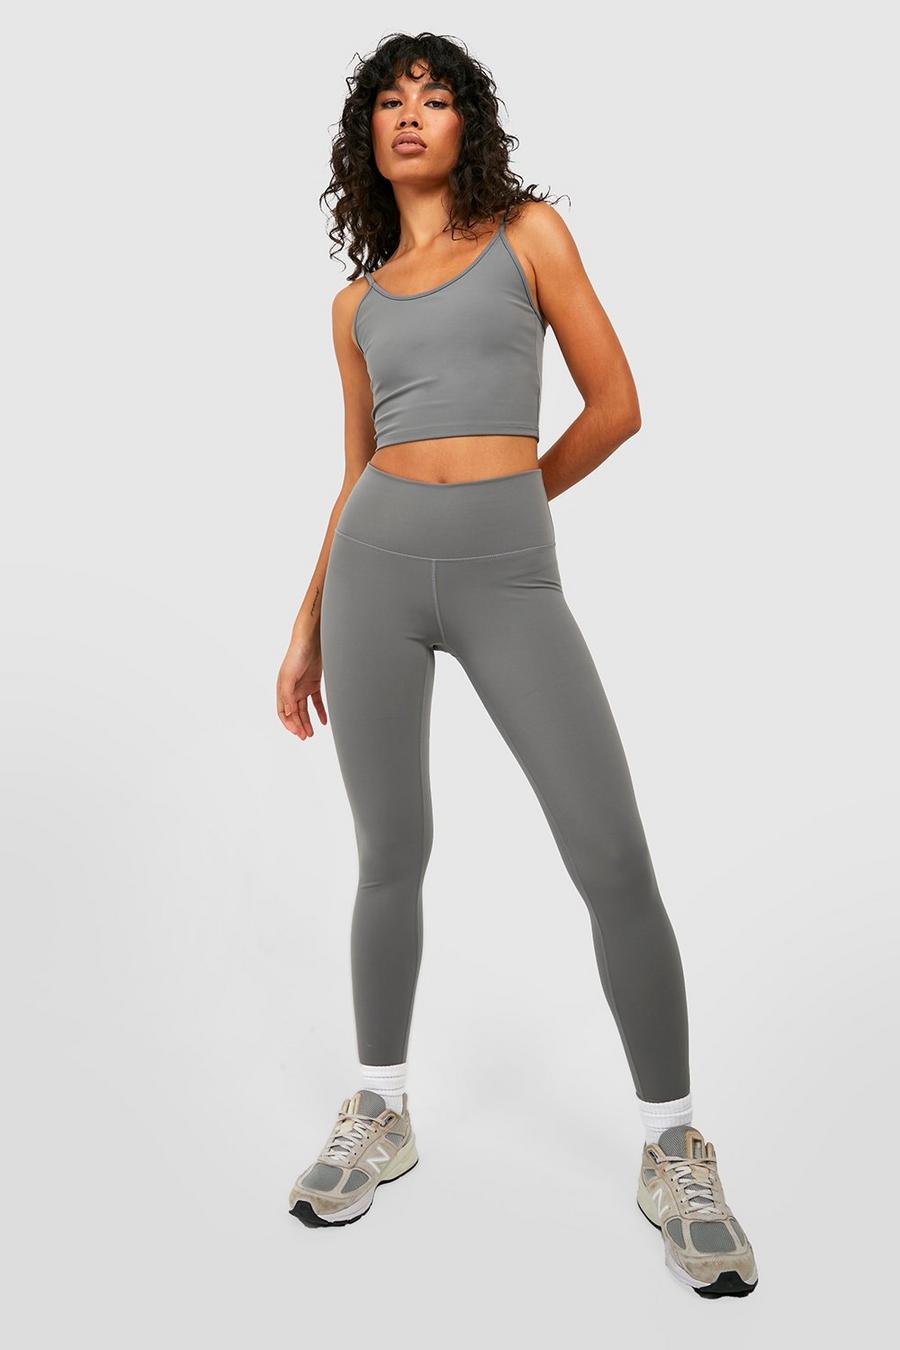 Olive green Premium Super Soft Peached Workout Leggings